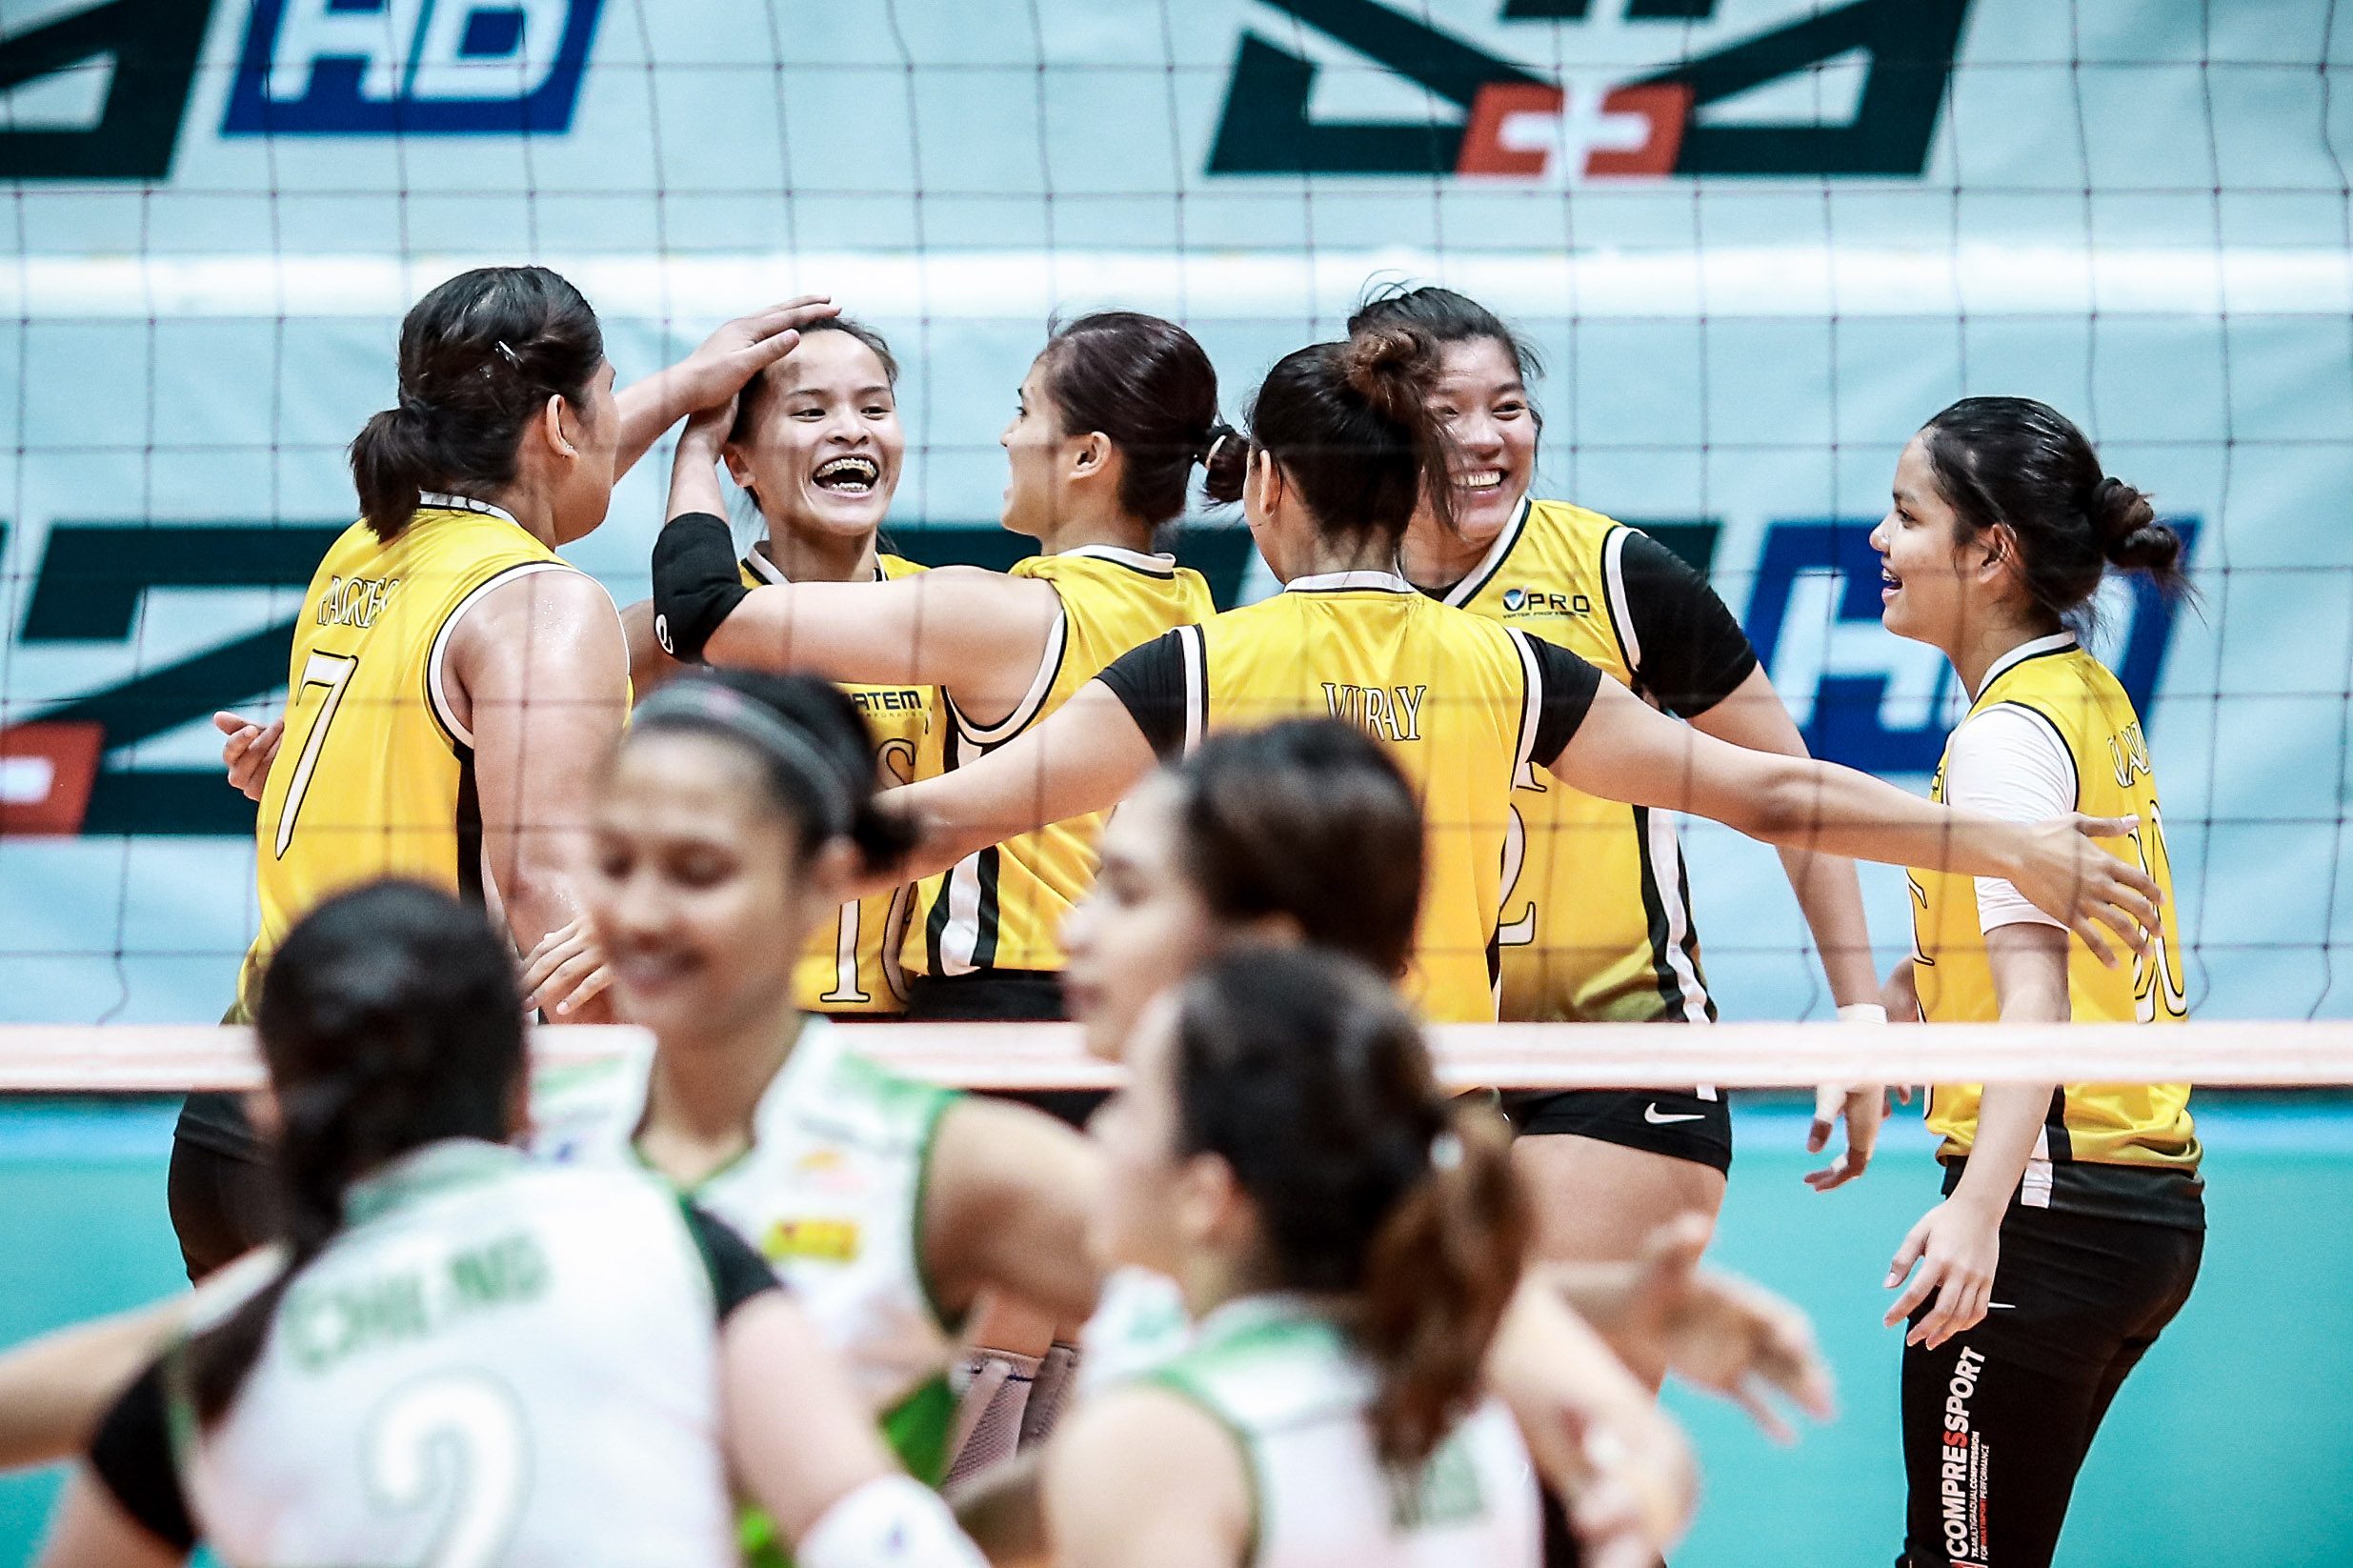 UST aims for La Salle sweep as Adamson, NU vie to snap skids